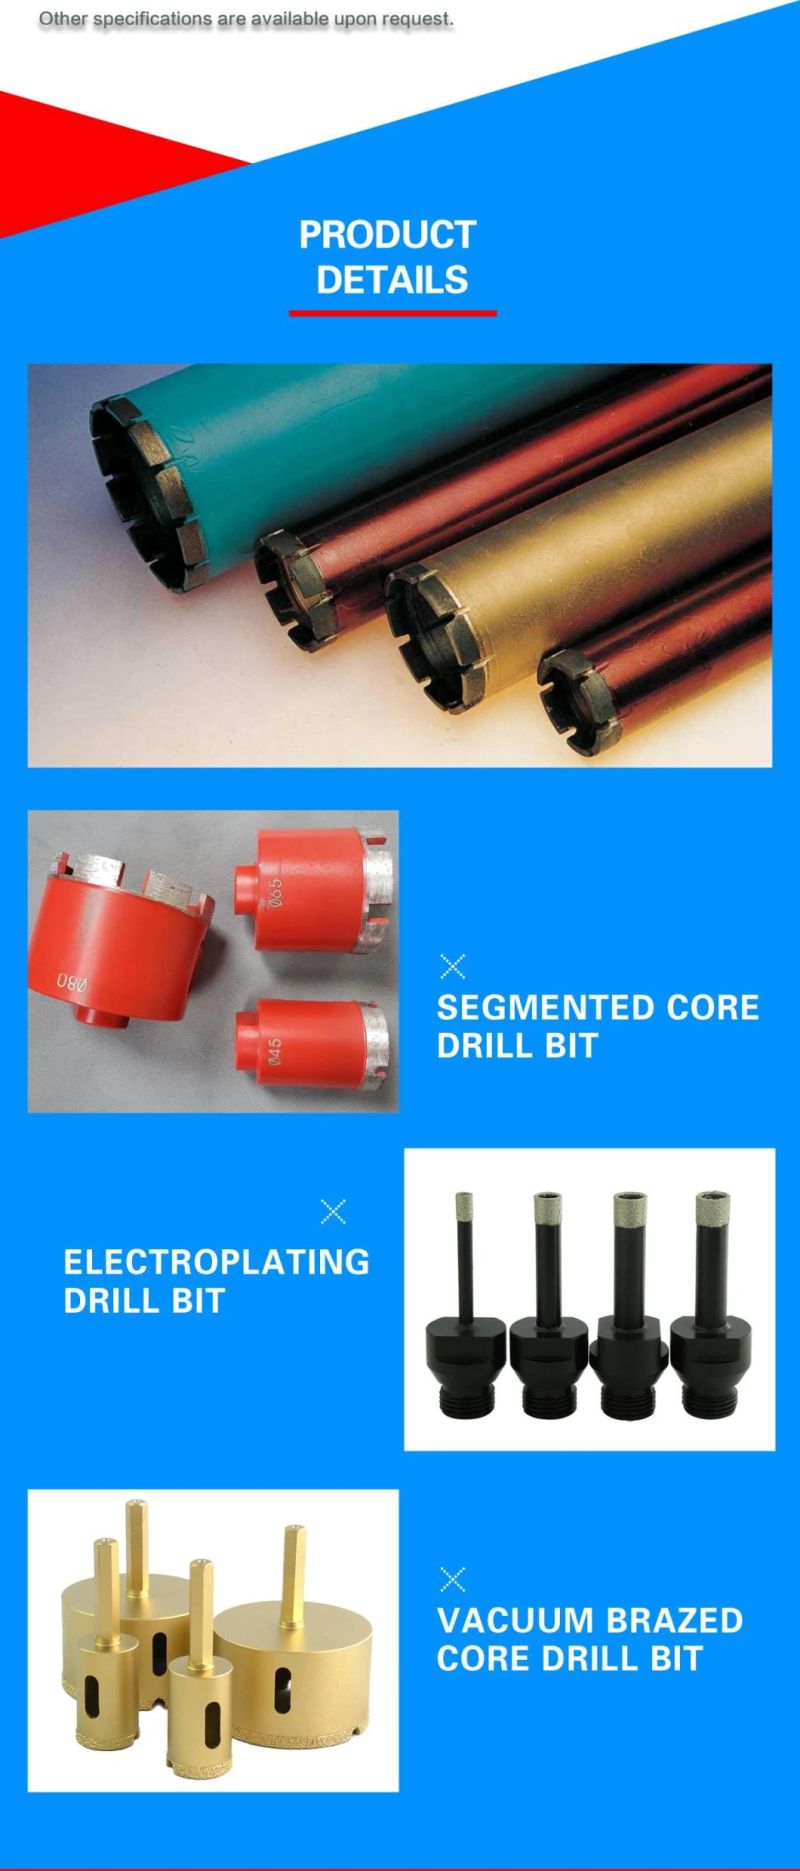 30*M14 High Quality Alloy Precision Diamond Drill Bit for Reinforced Concrete Drilling